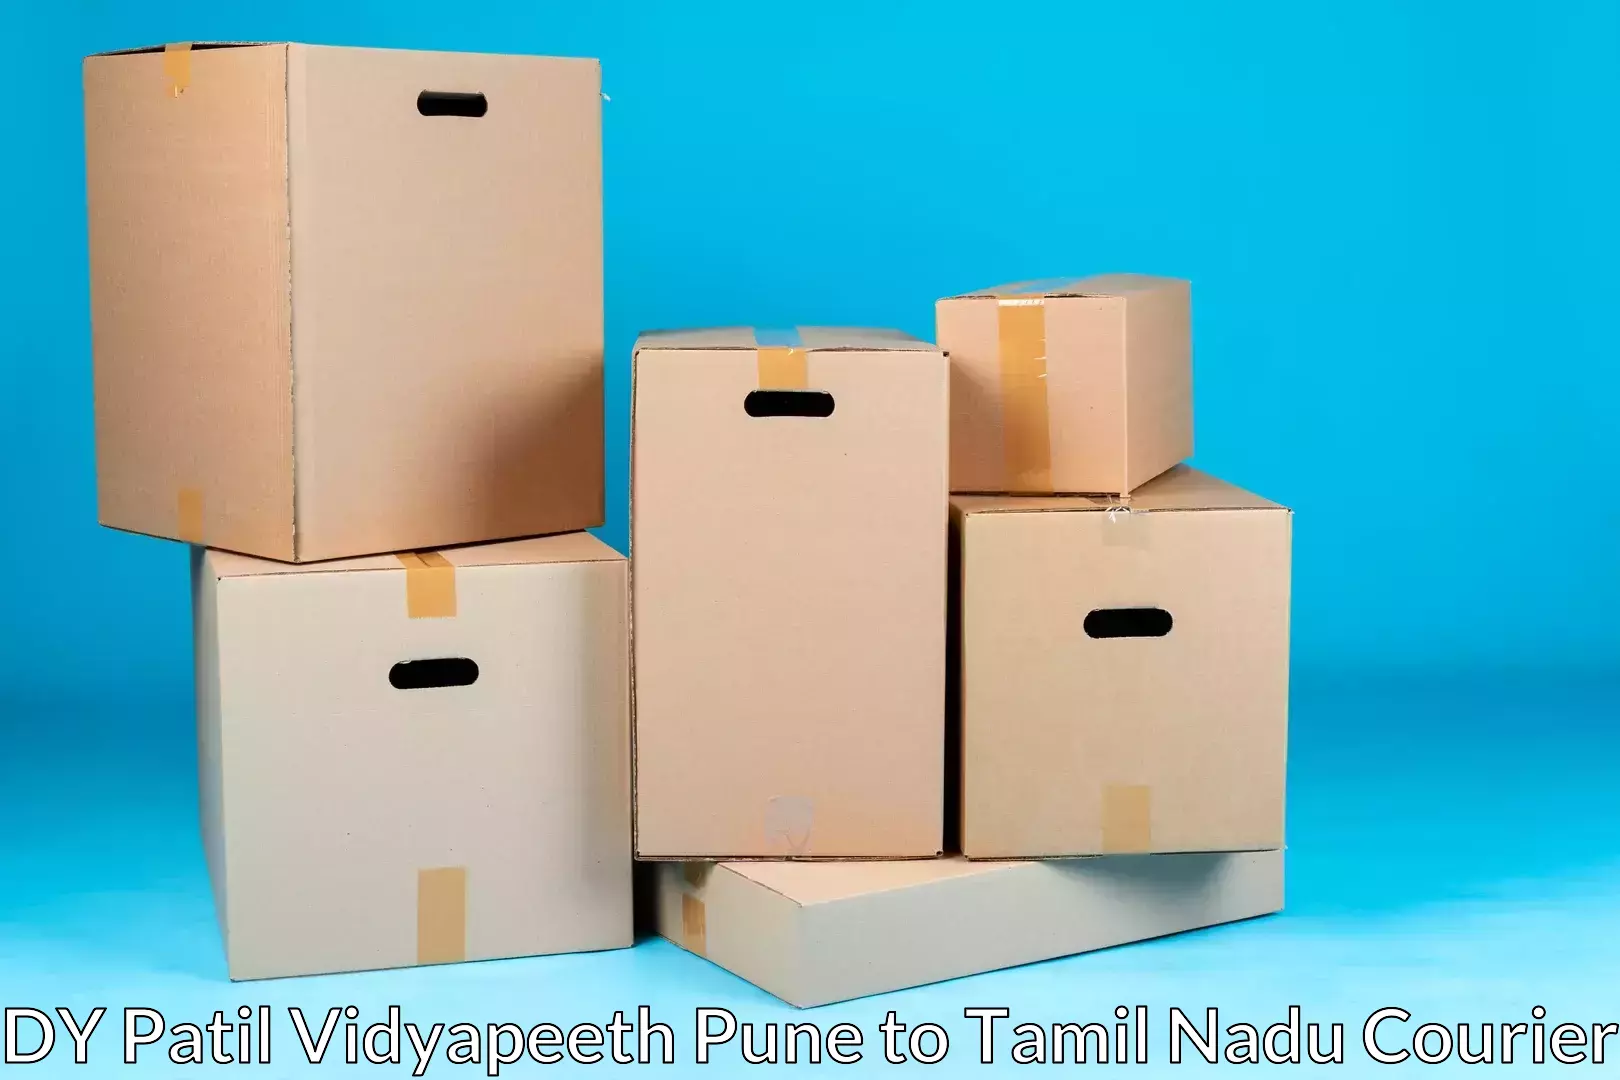 Personalized moving plans DY Patil Vidyapeeth Pune to Tamil Nadu